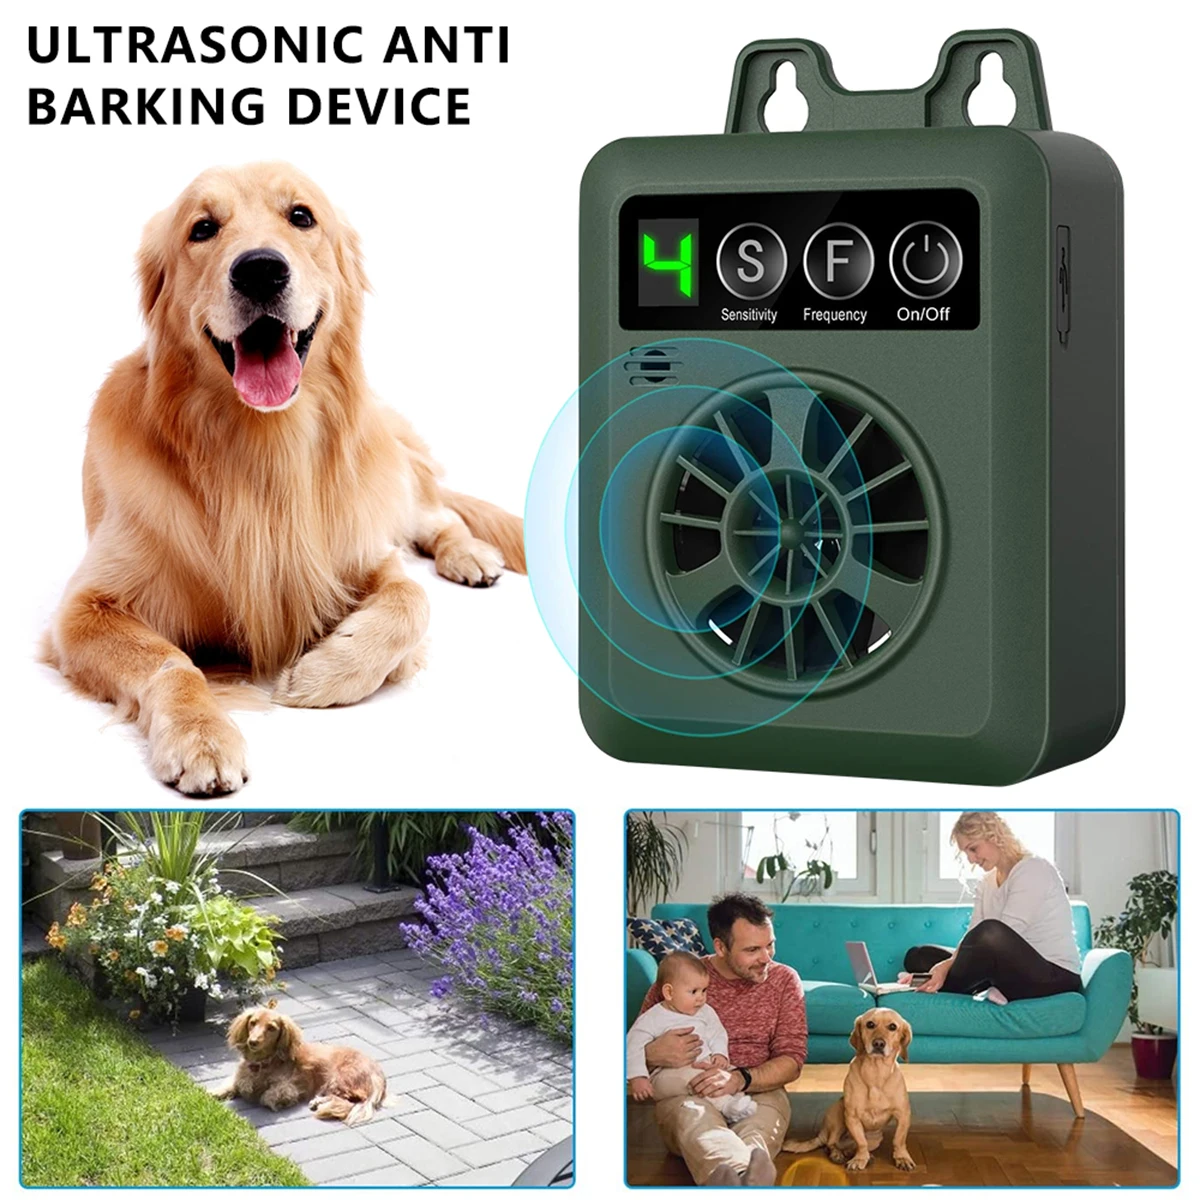 

New Anti Barking Device Ultrasonic Bark Stopper Reusable Portable Dog Barking Control Device with 3 Adjustable Frequency IP65